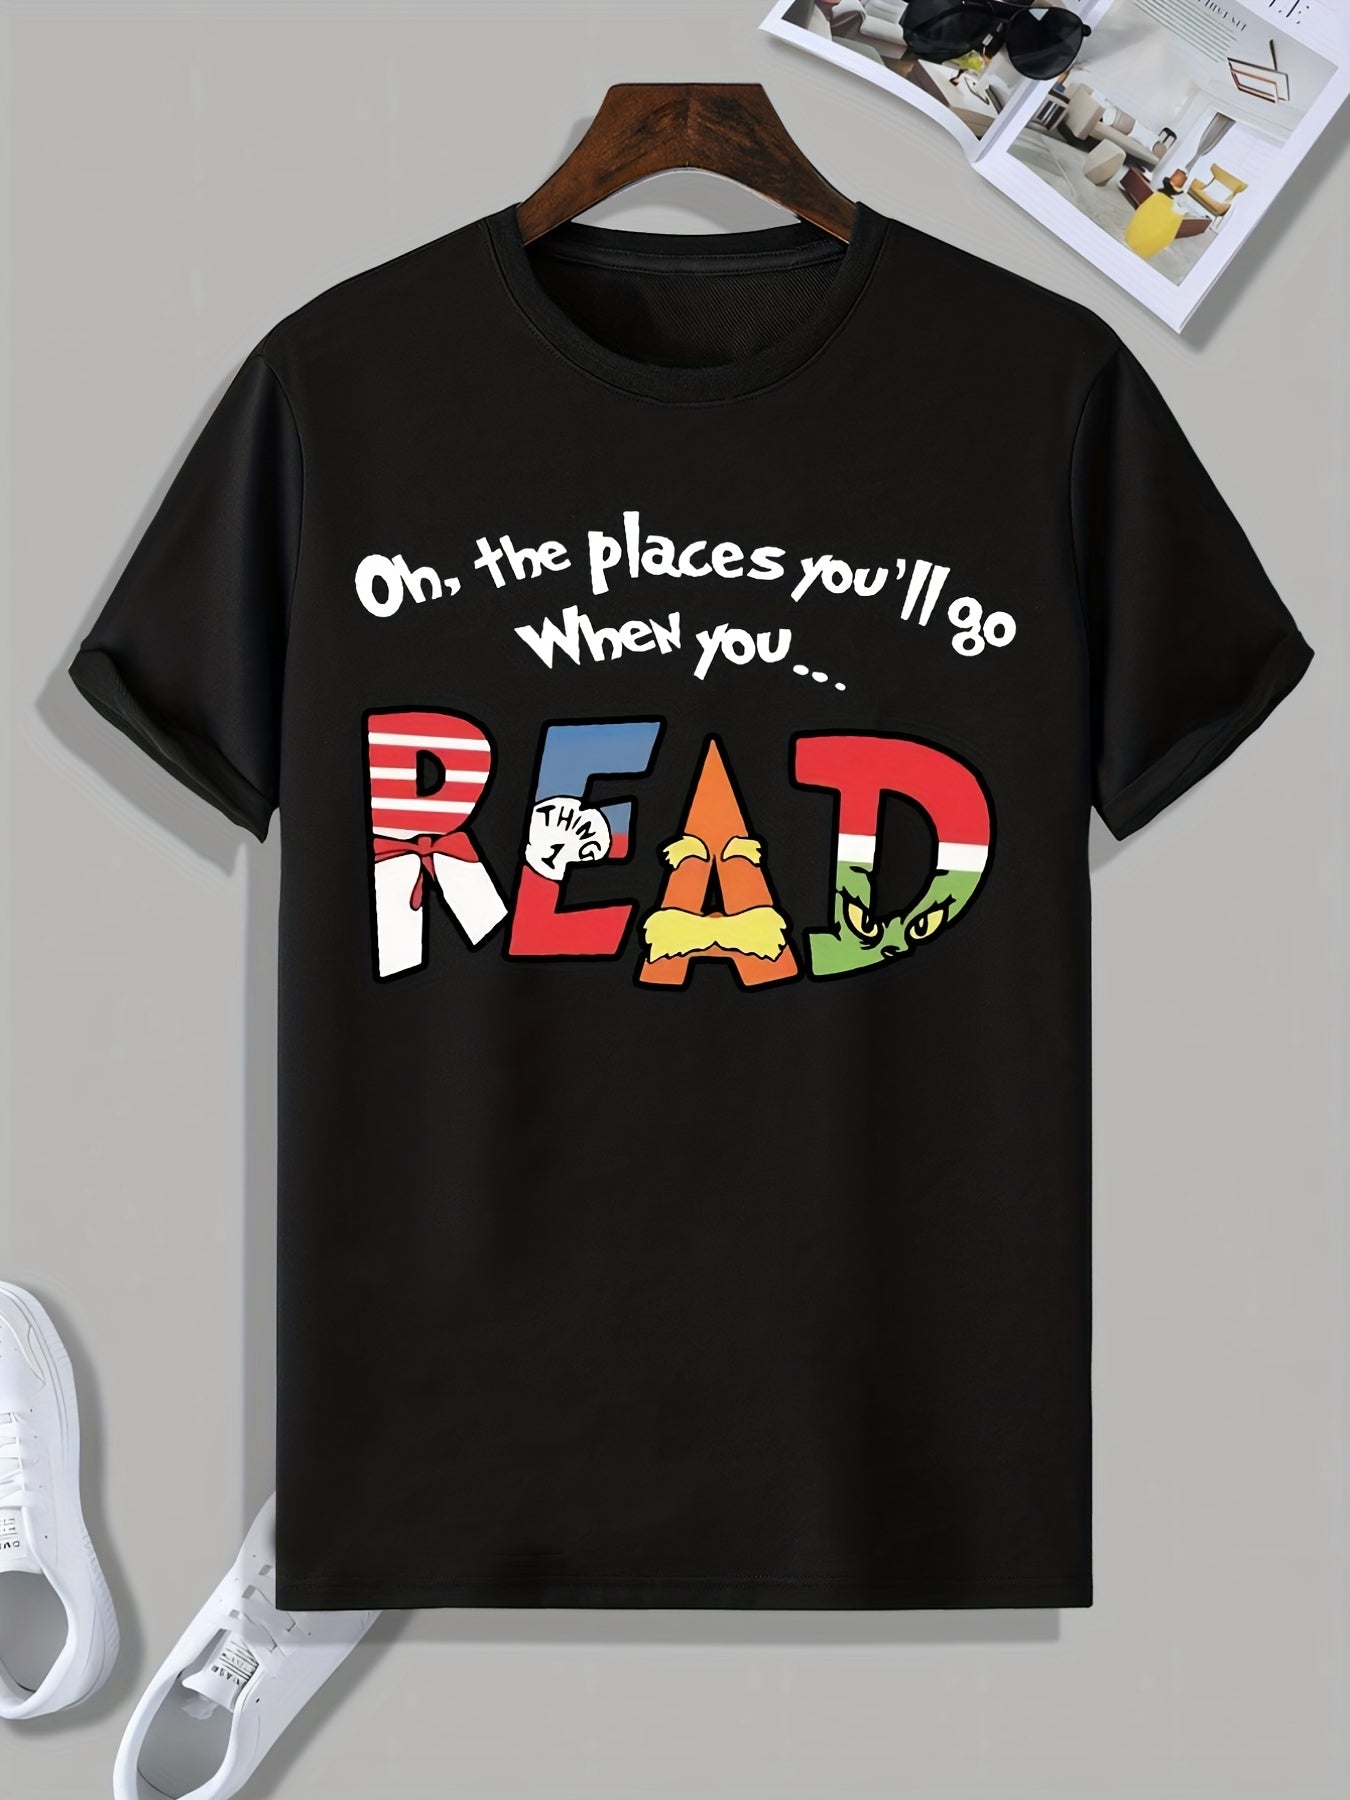 Tees For Men, 'Read' Print T Shirt, Casual Short Sleeve Tshirt For Summer Spring Fall, Tops As Gifts, For Bookworms And Book Lovers